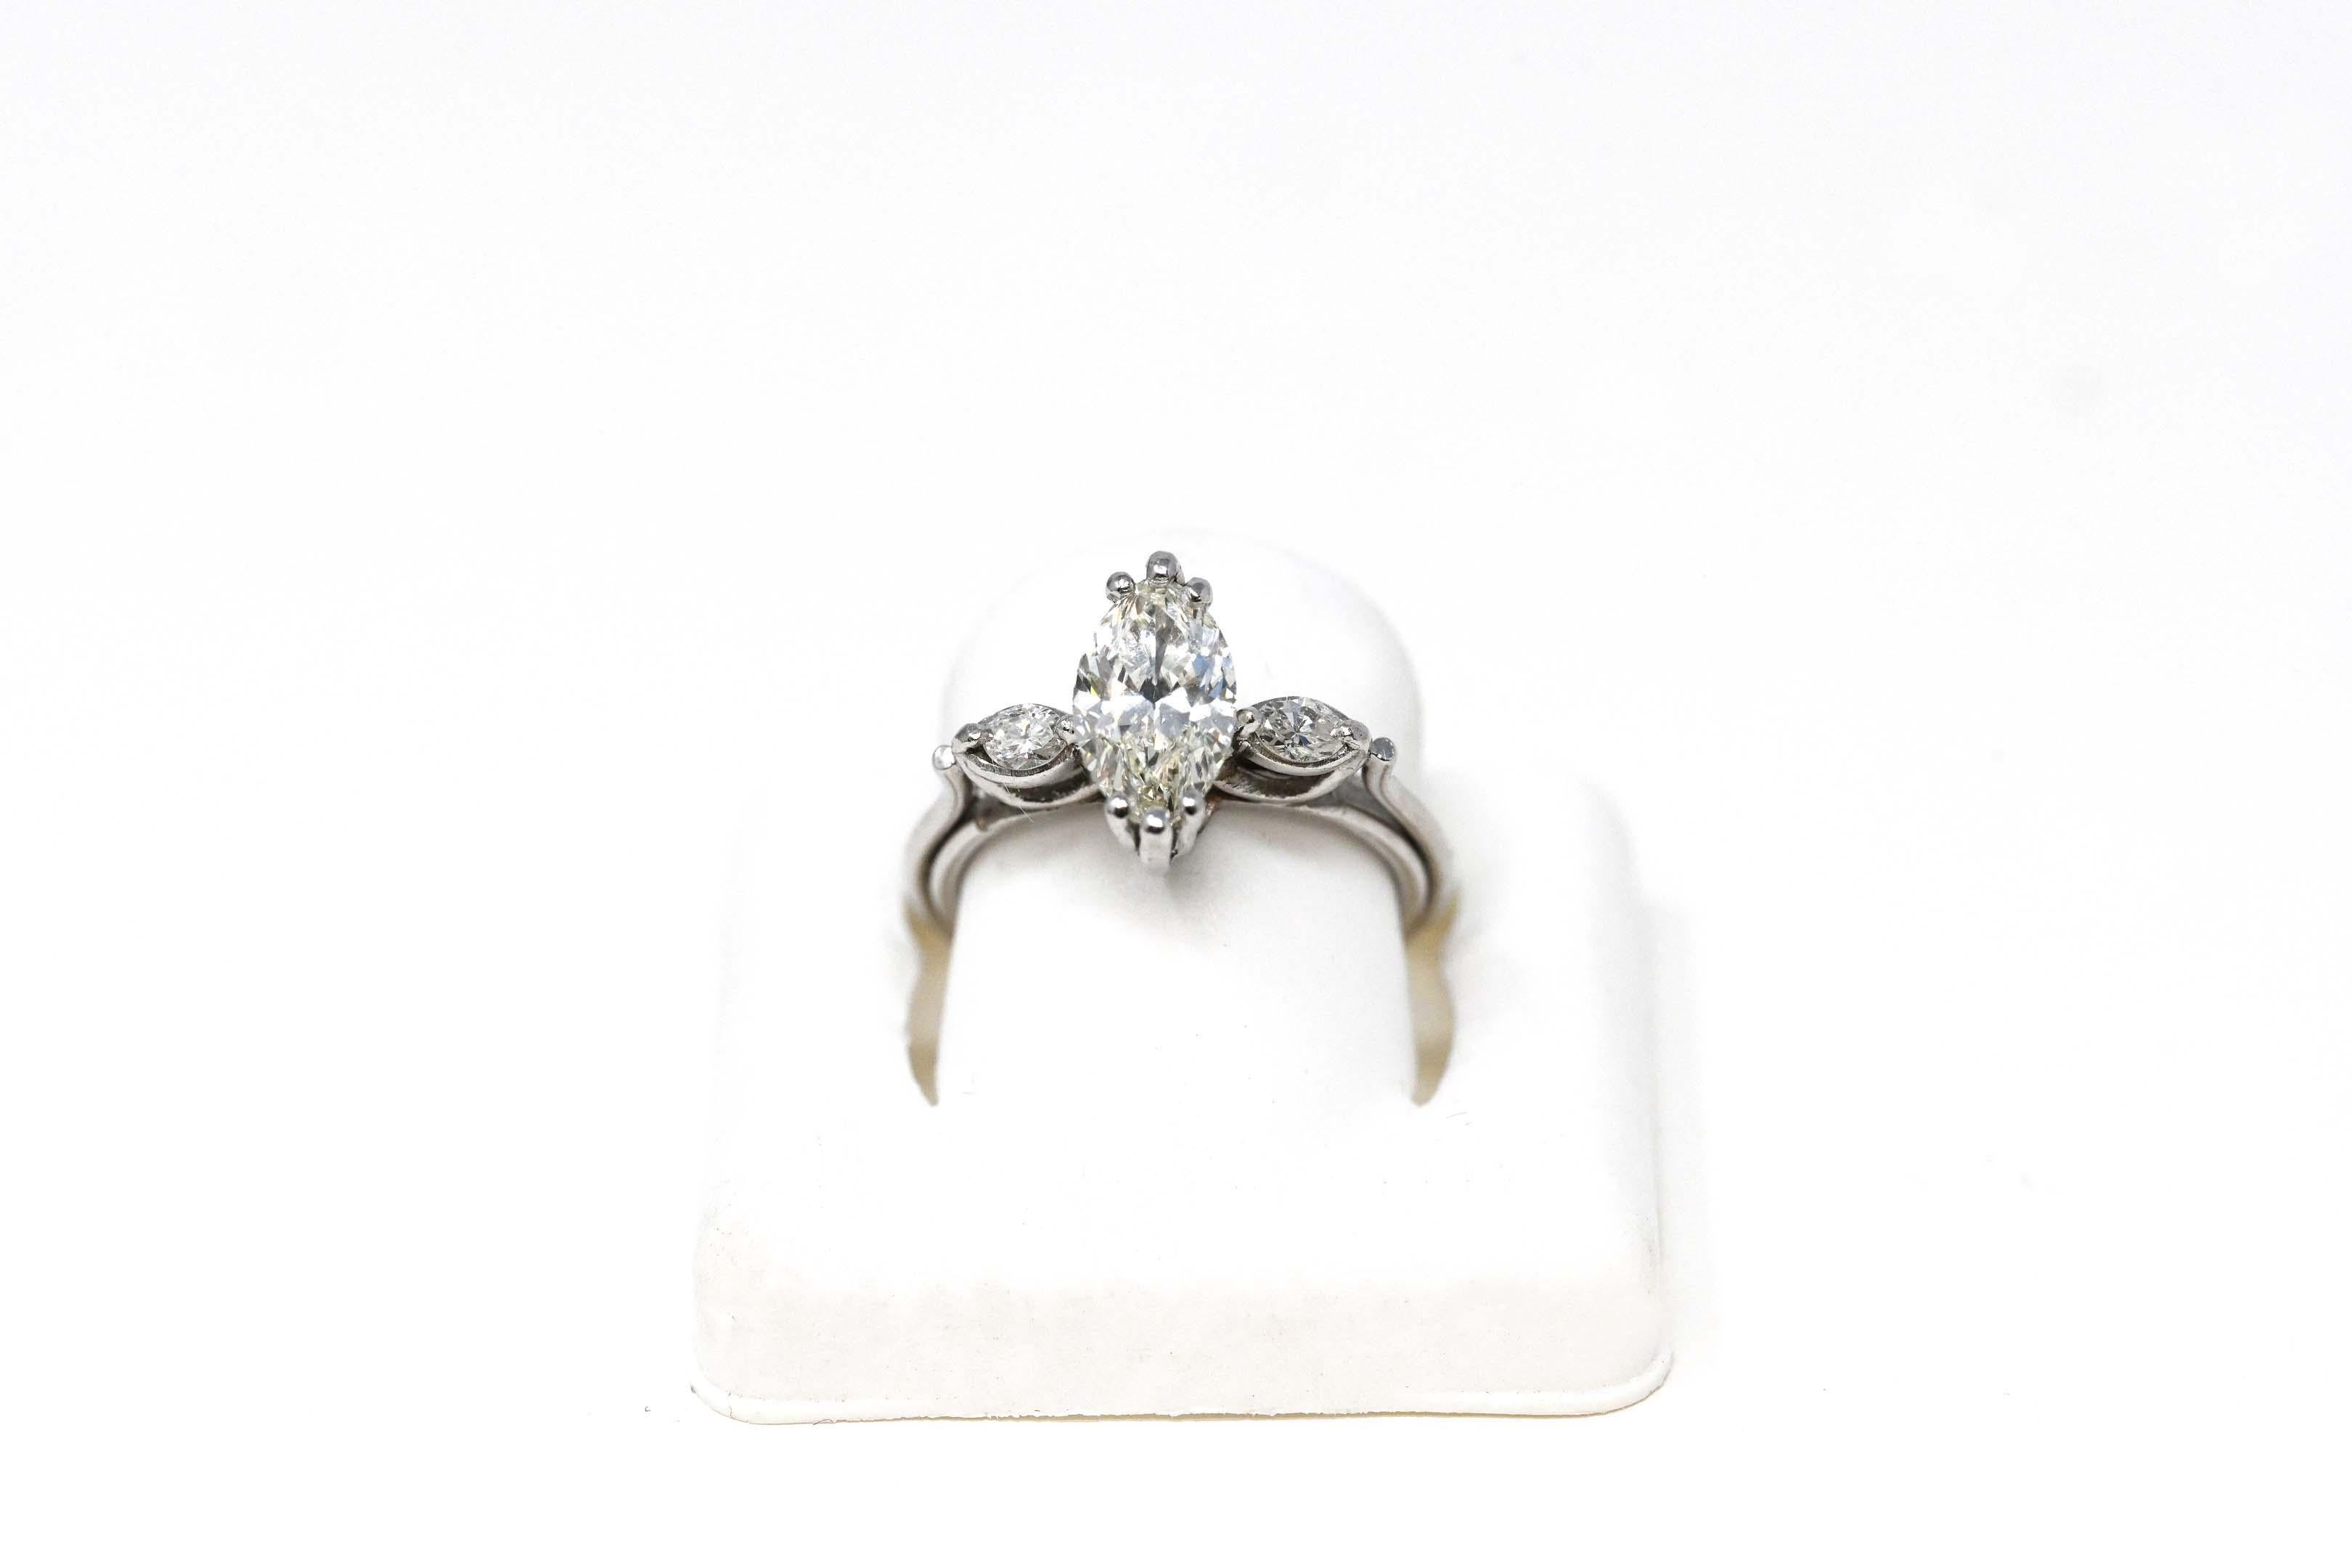 One (1) ladies ring in platinum (by acid test) classic style, polished finish, total weight of 5.5 grams. The ring is set with: One (1) marquise cut diamond, the weight: 1.26 carat. Measures 10.00 x 5.75 mm, depth 3.45mm. Clarity VVS2. Color H-I.